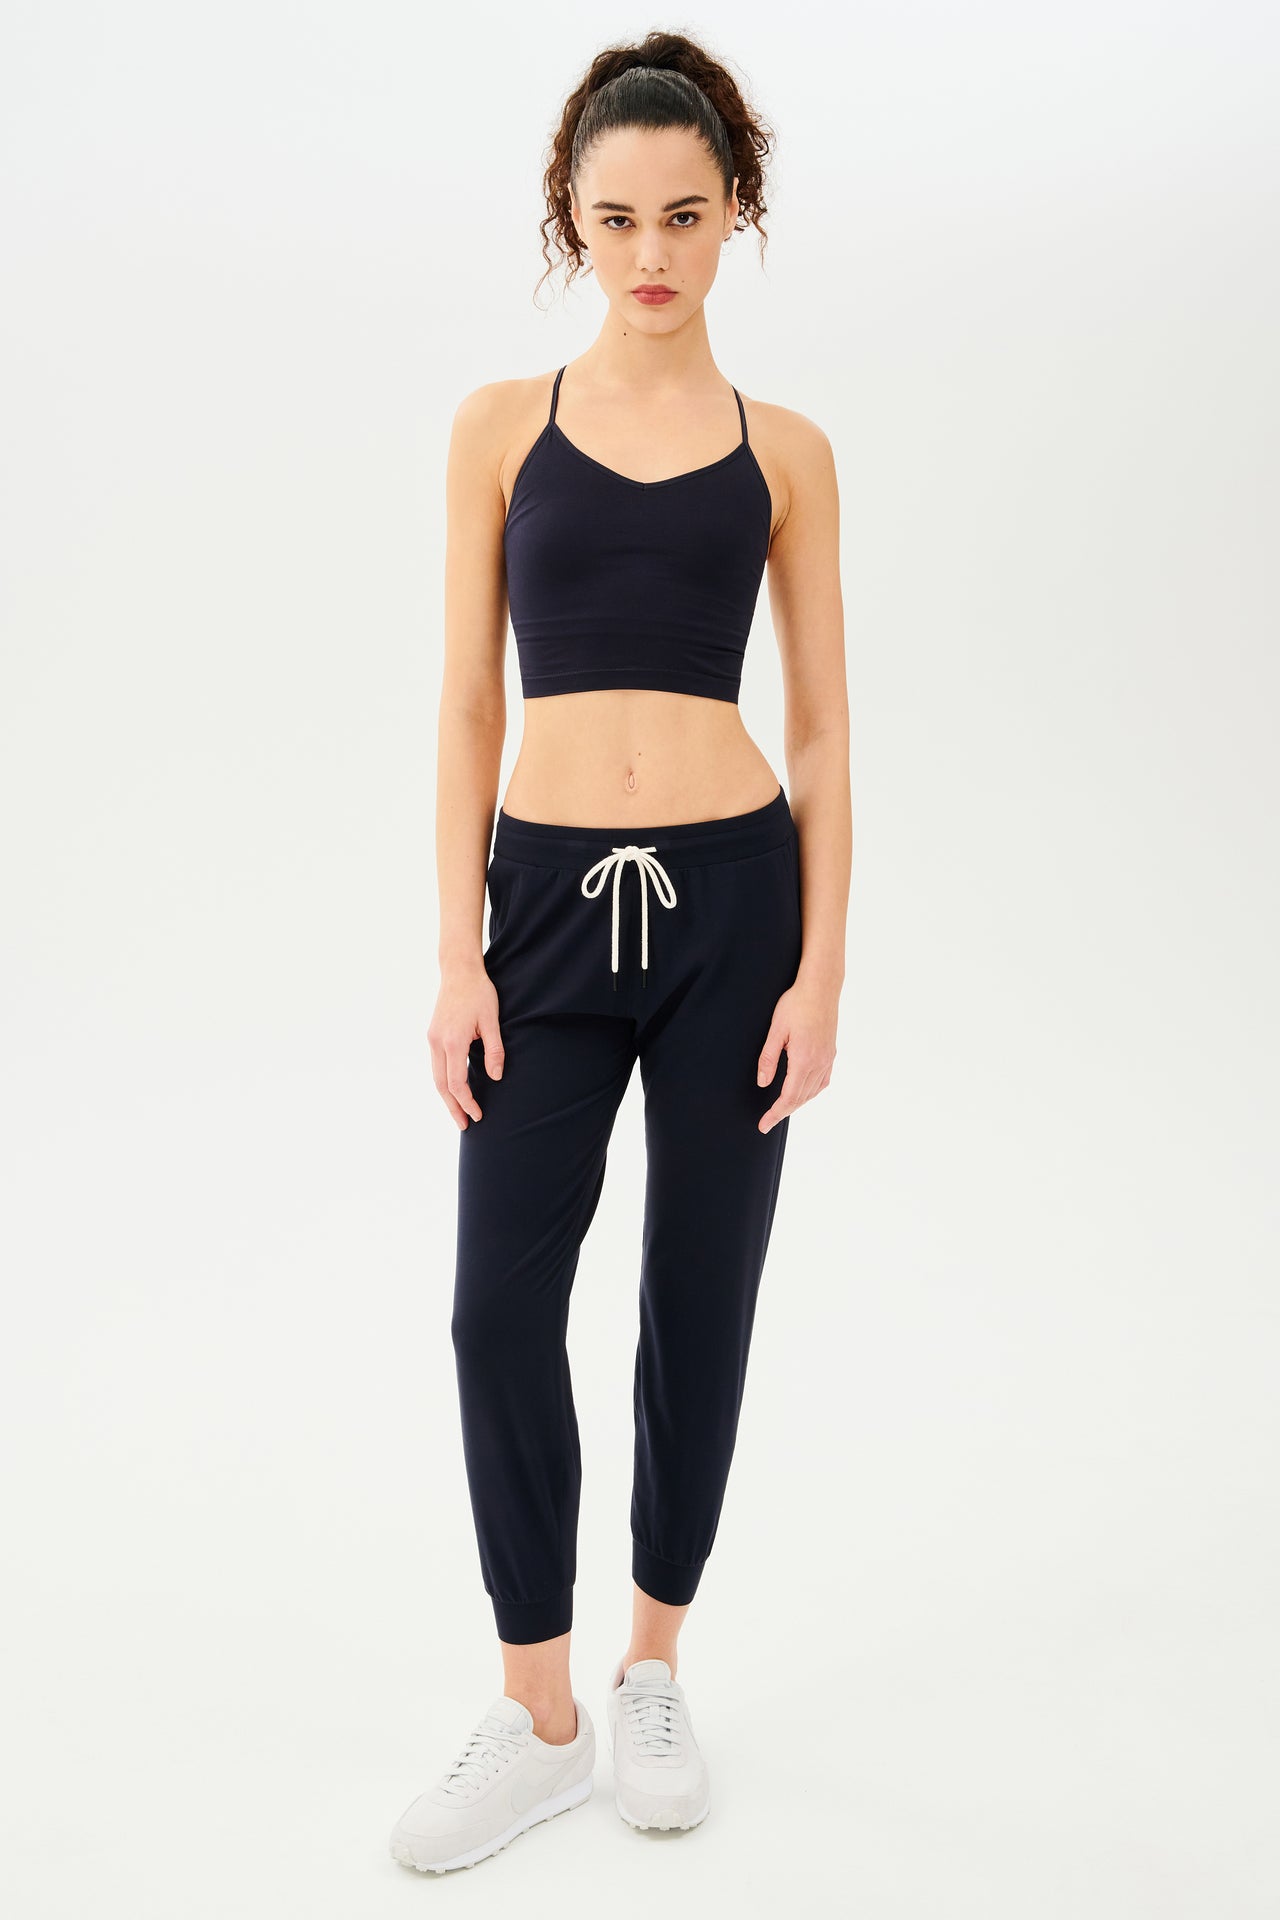 The model is wearing a Splits59 Loren Seamless Cami - Indigo with a built-in shelf bra and black joggers, made from chafe-free fabric.